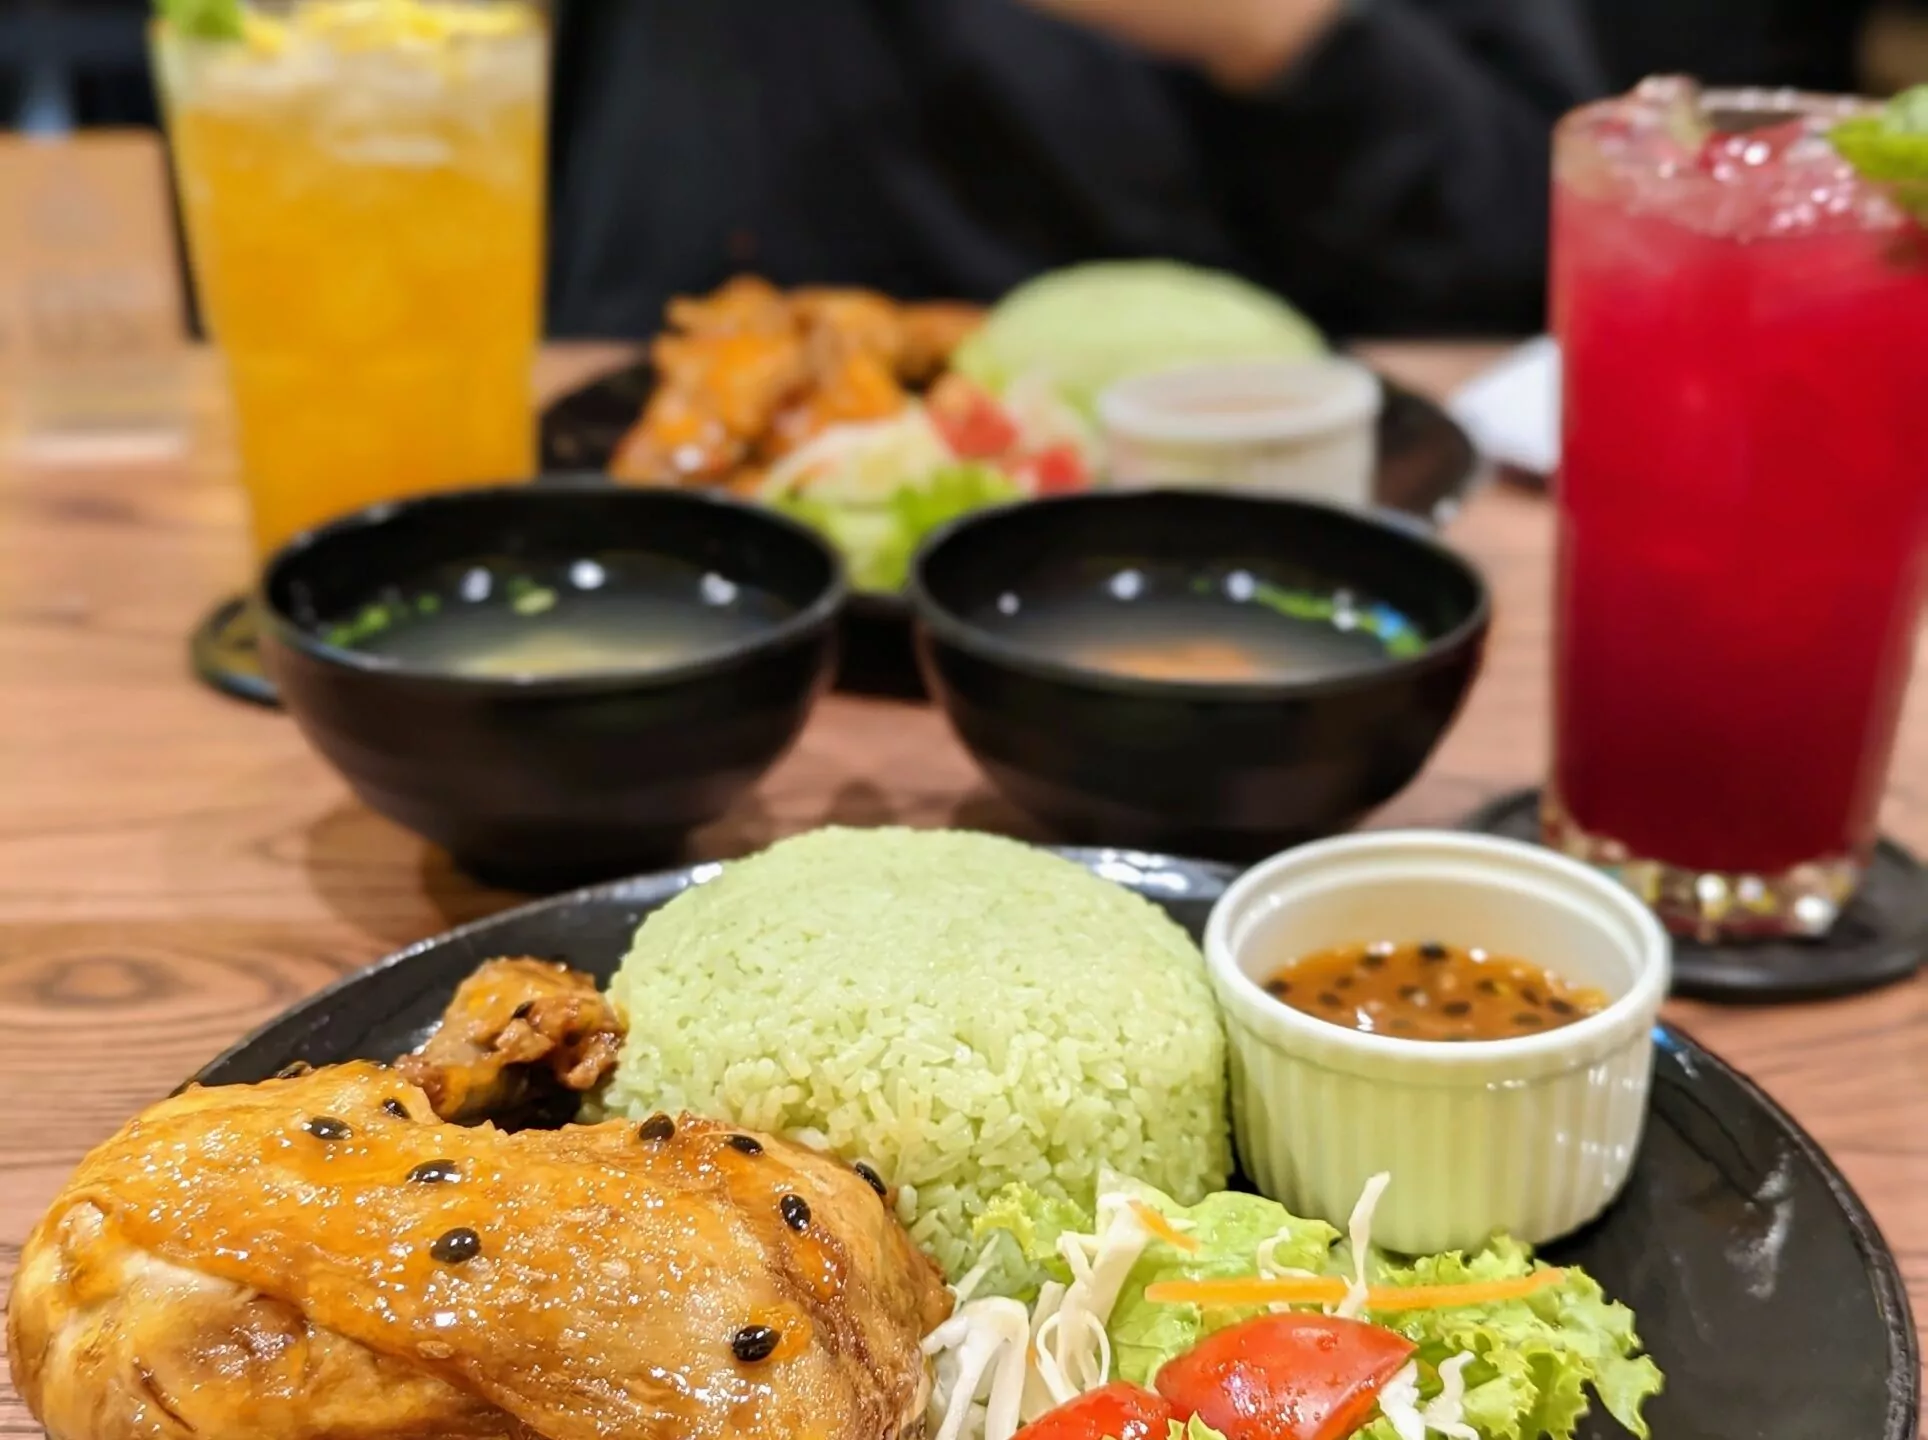 Cơm gà sốt chanh dây, crusty grilled chicken leg with sweet and sour passion fruit sauce, served with steamed tender green rice, salad, and a glass of freshly squeezed mango juice. Always according to the motto: A chicken a day keeps the doctor away. Price: 81,000 VNĐ (≈3.22 EUR).